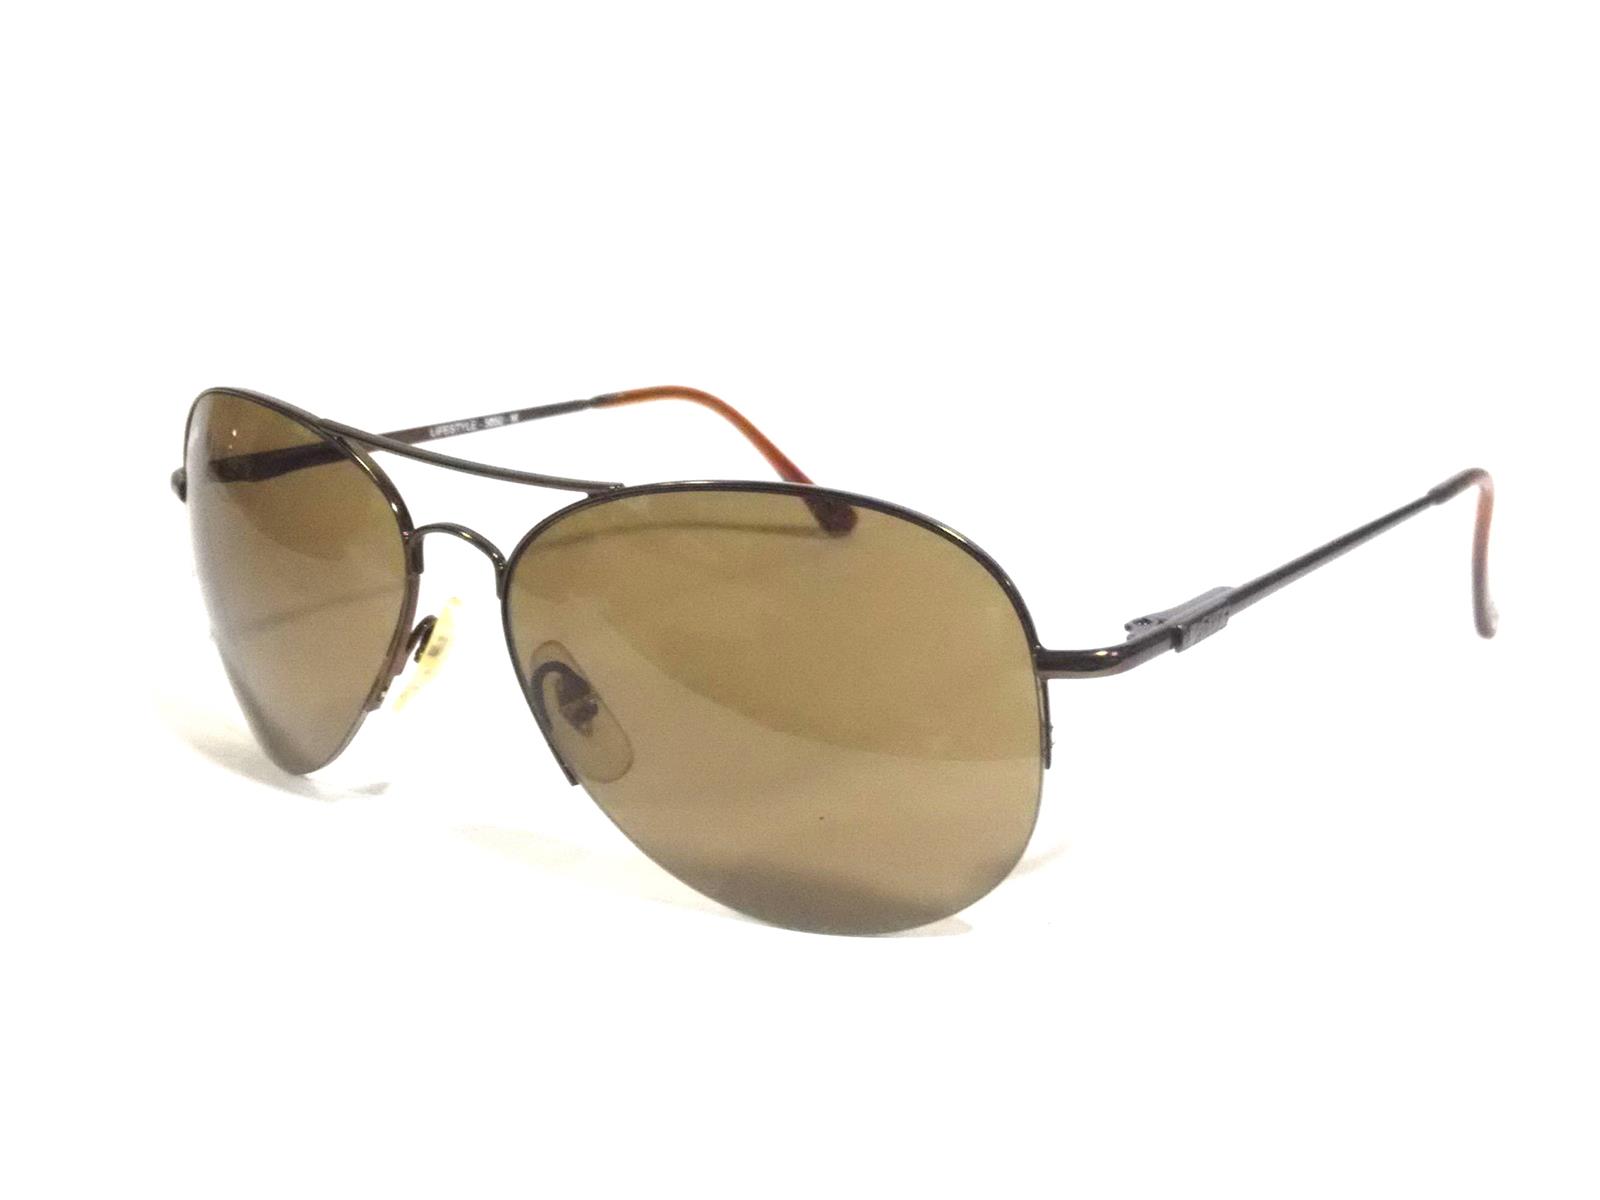 Brown Aviator Sunglasses for men with polycarbonate lens